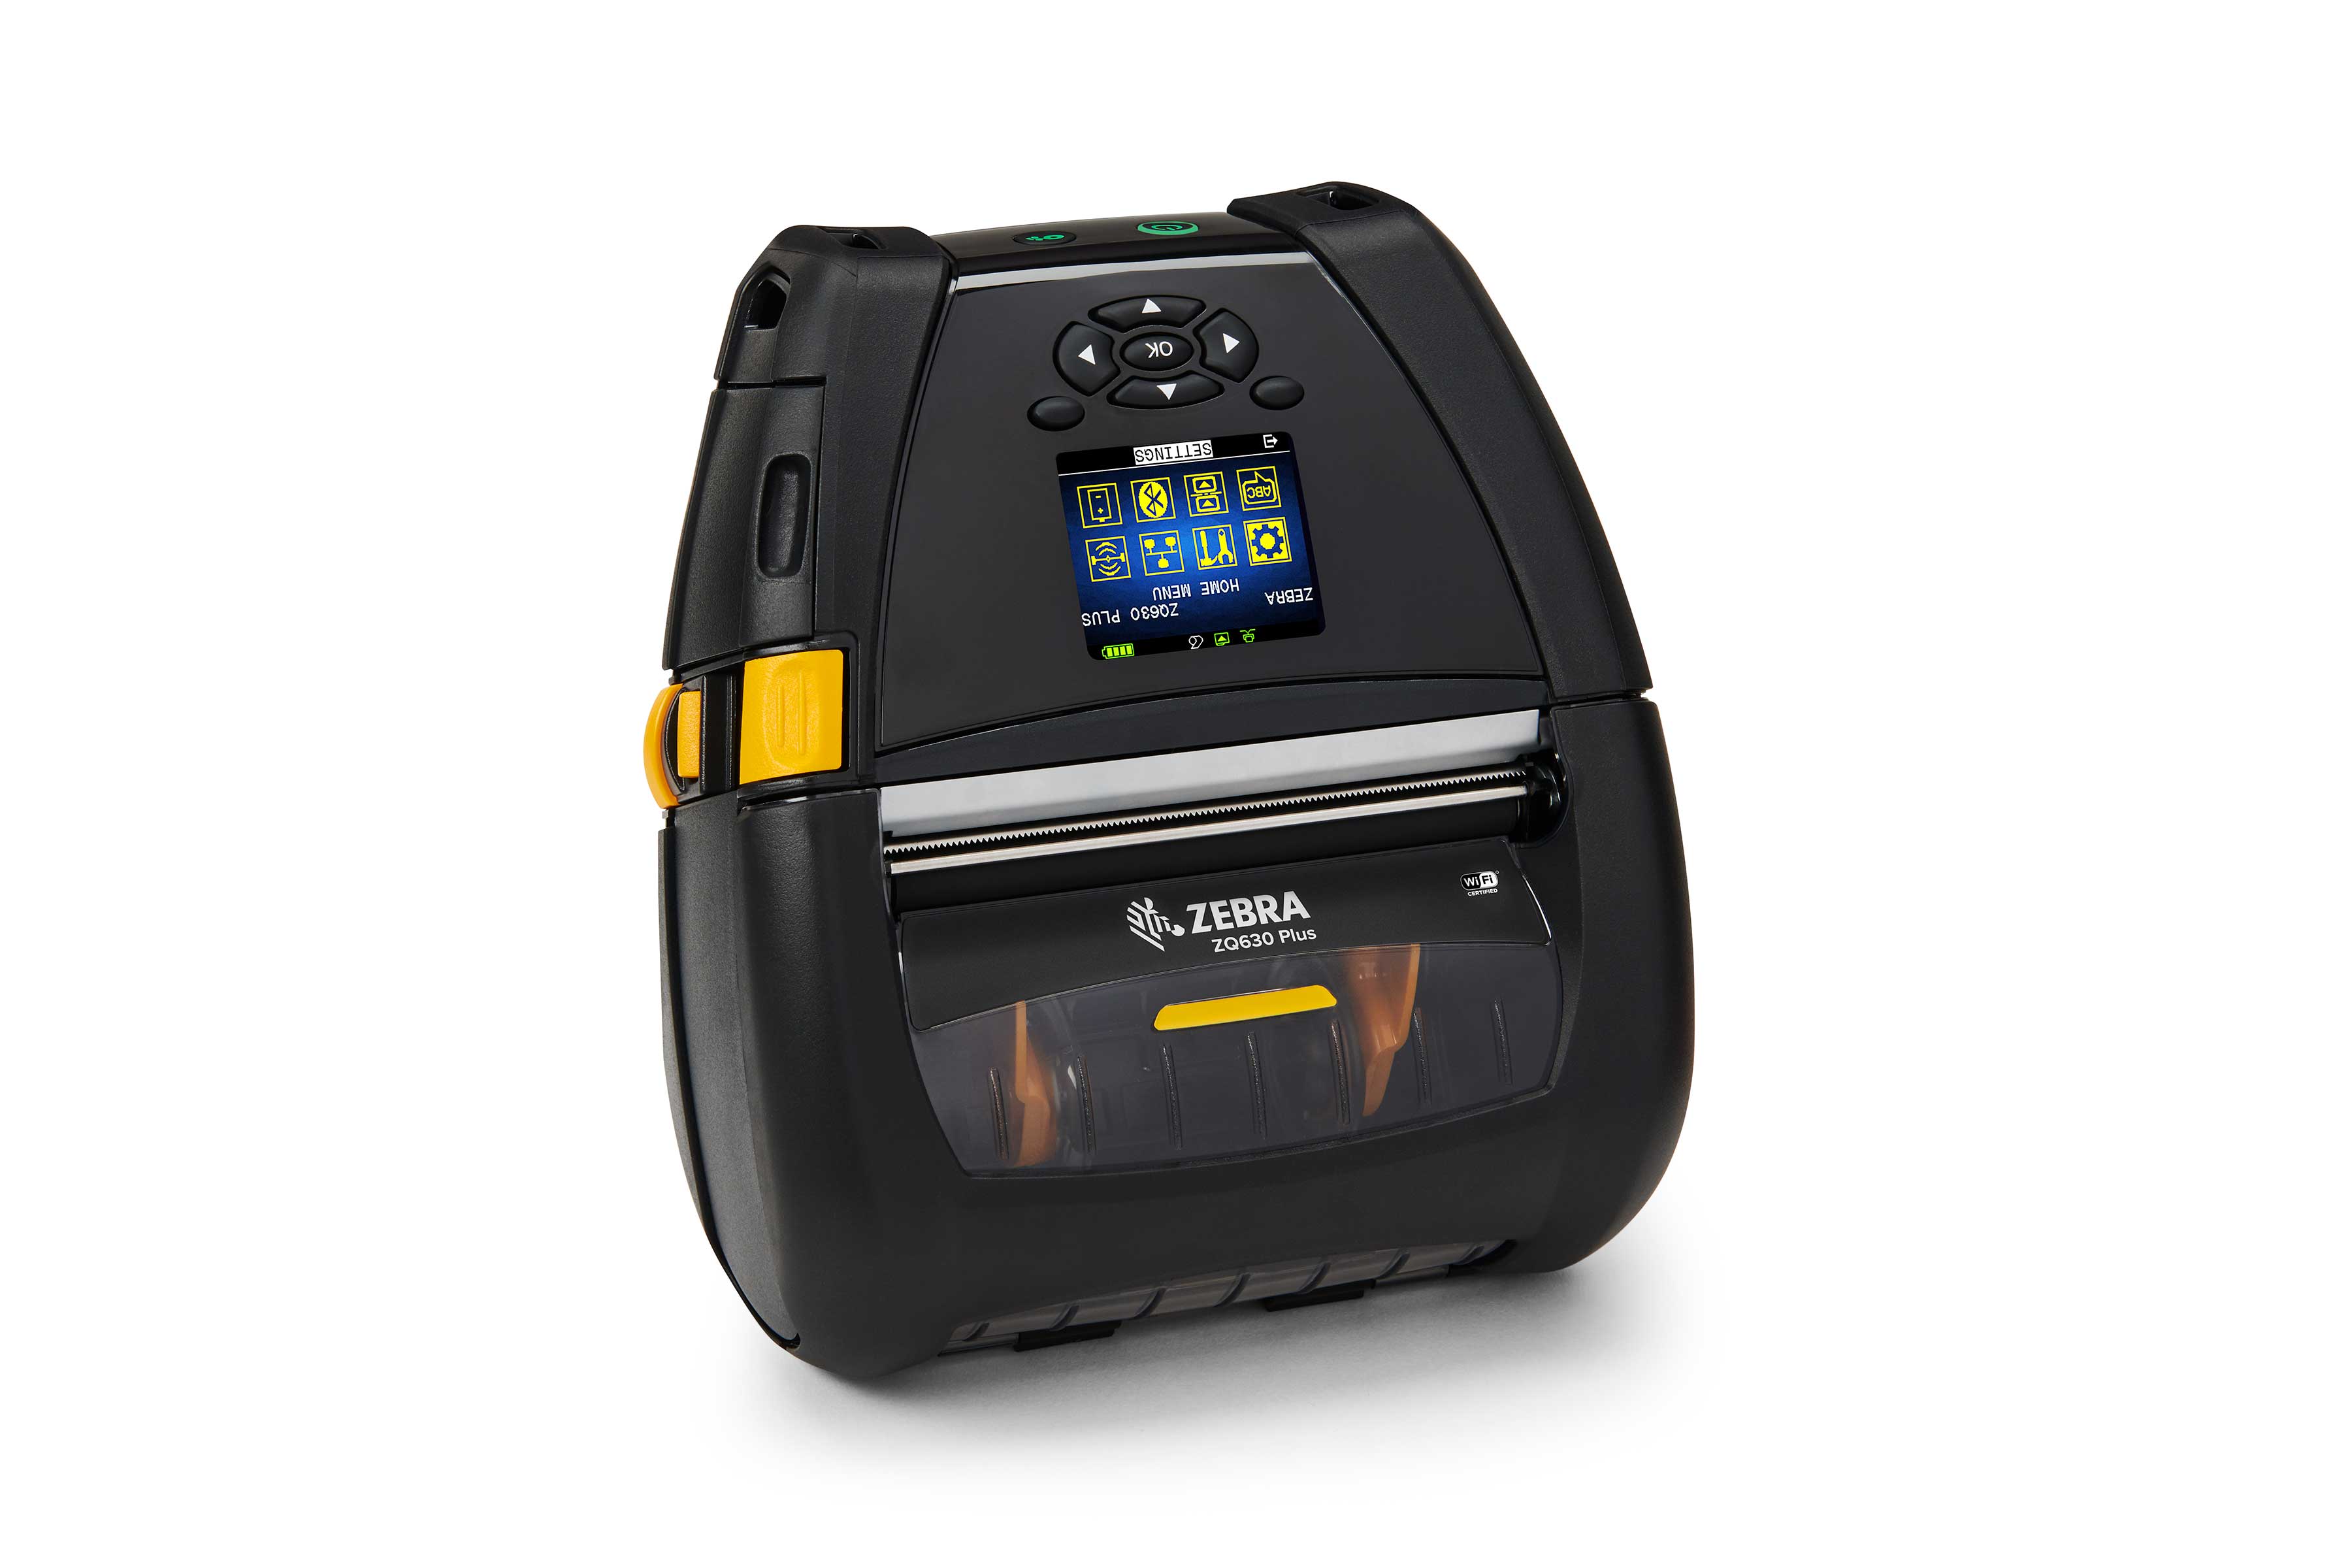 Front view of a Zebra ZQ630 mobile printers designed to be portable for on-the-go use